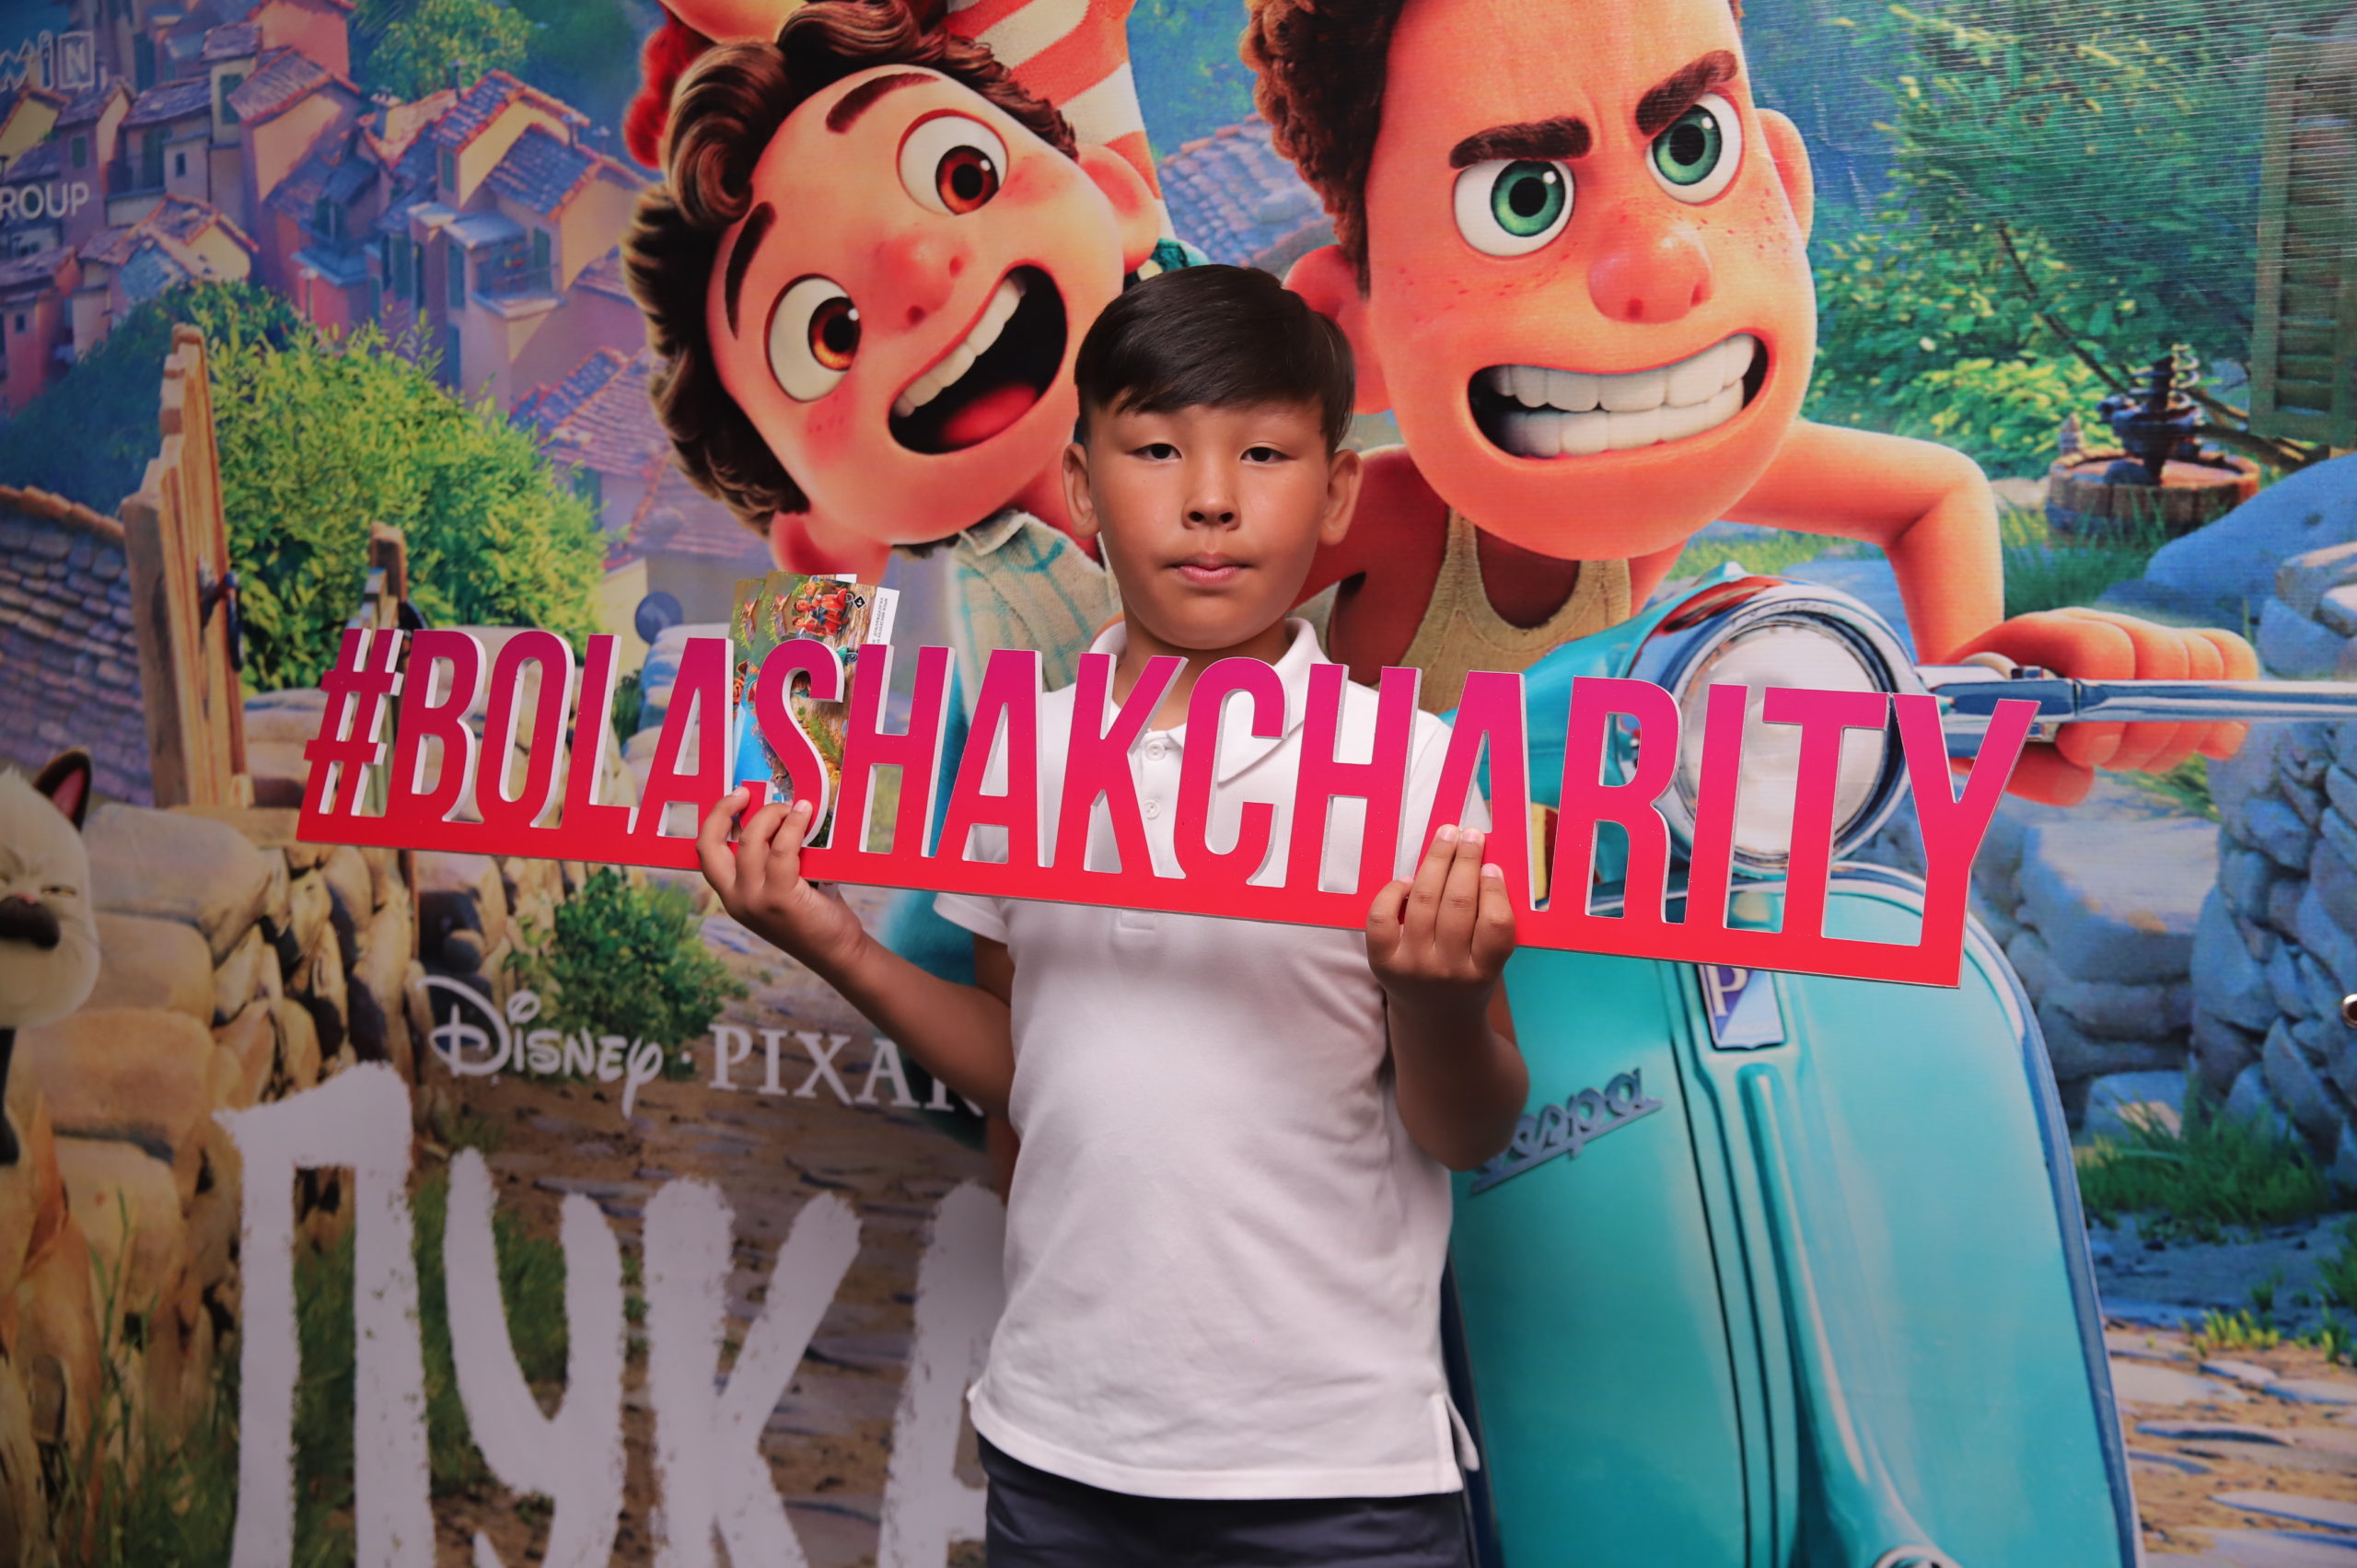 Disney's Kazakh Dubbing Project Celebrates 10 Year Anniversary with Release  of New Pixar Cartoon (Video) - The Astana Times